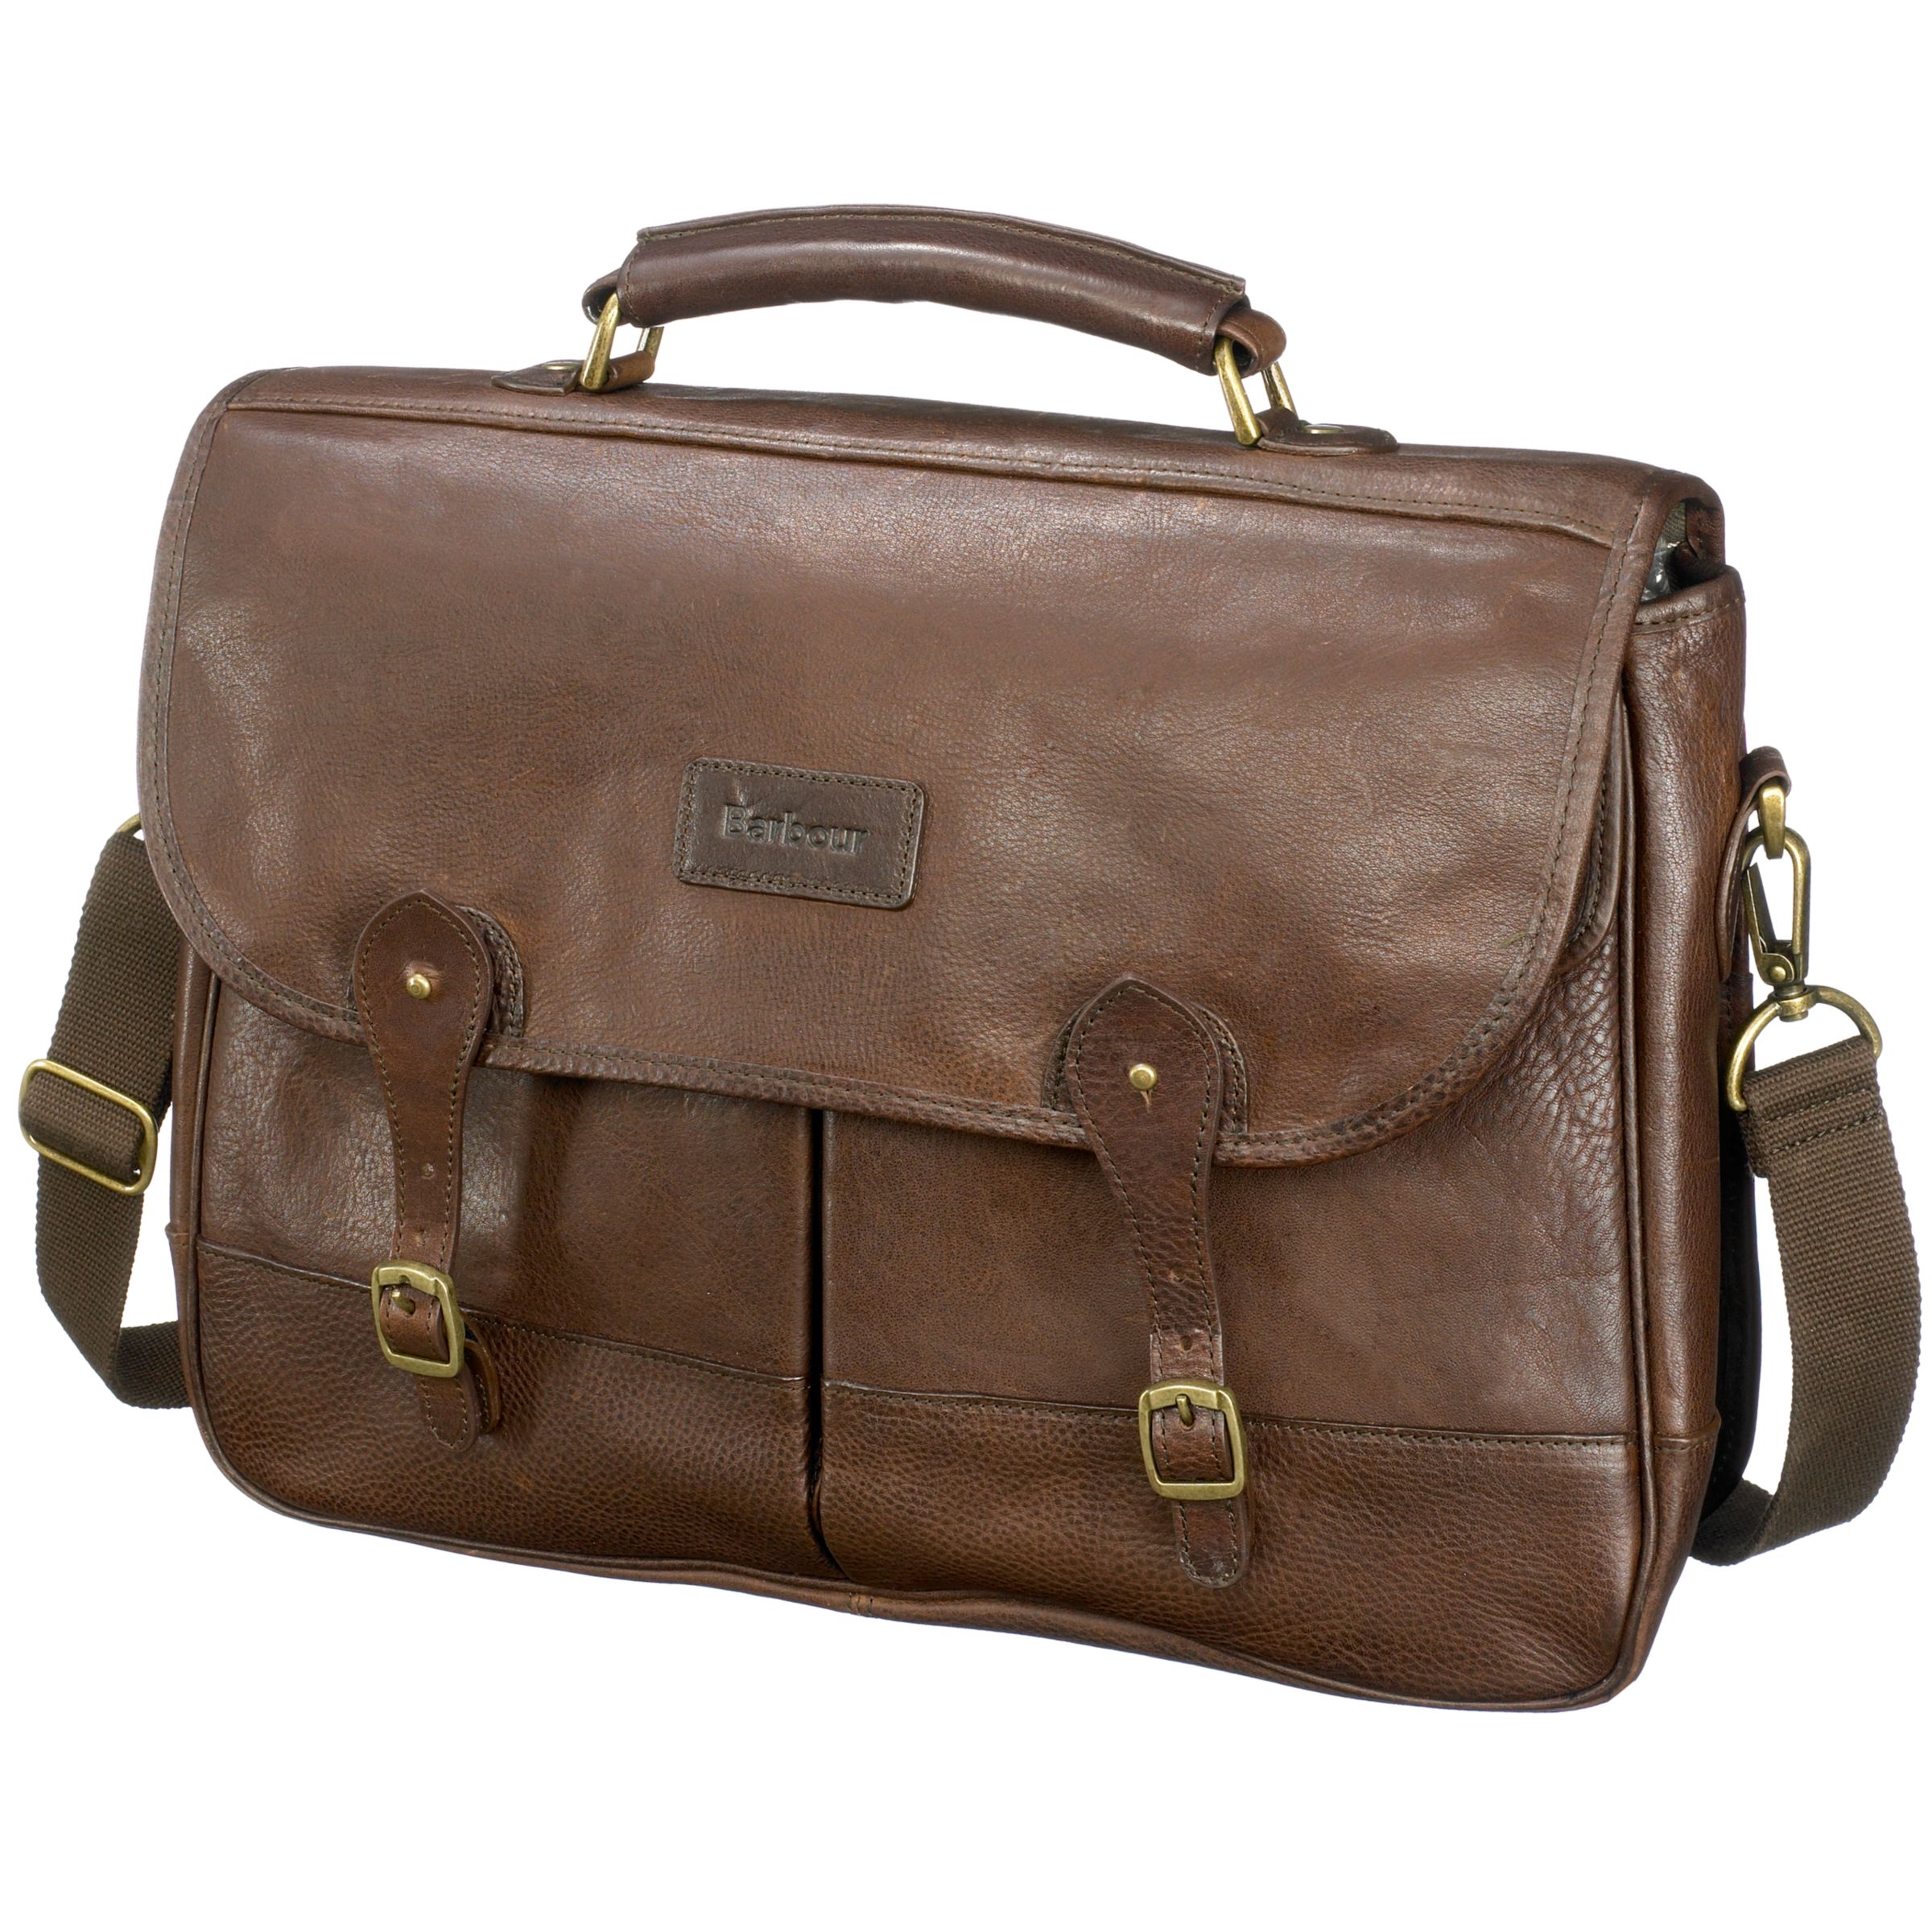 Barbour Leather Briefcase, Brown at John Lewis